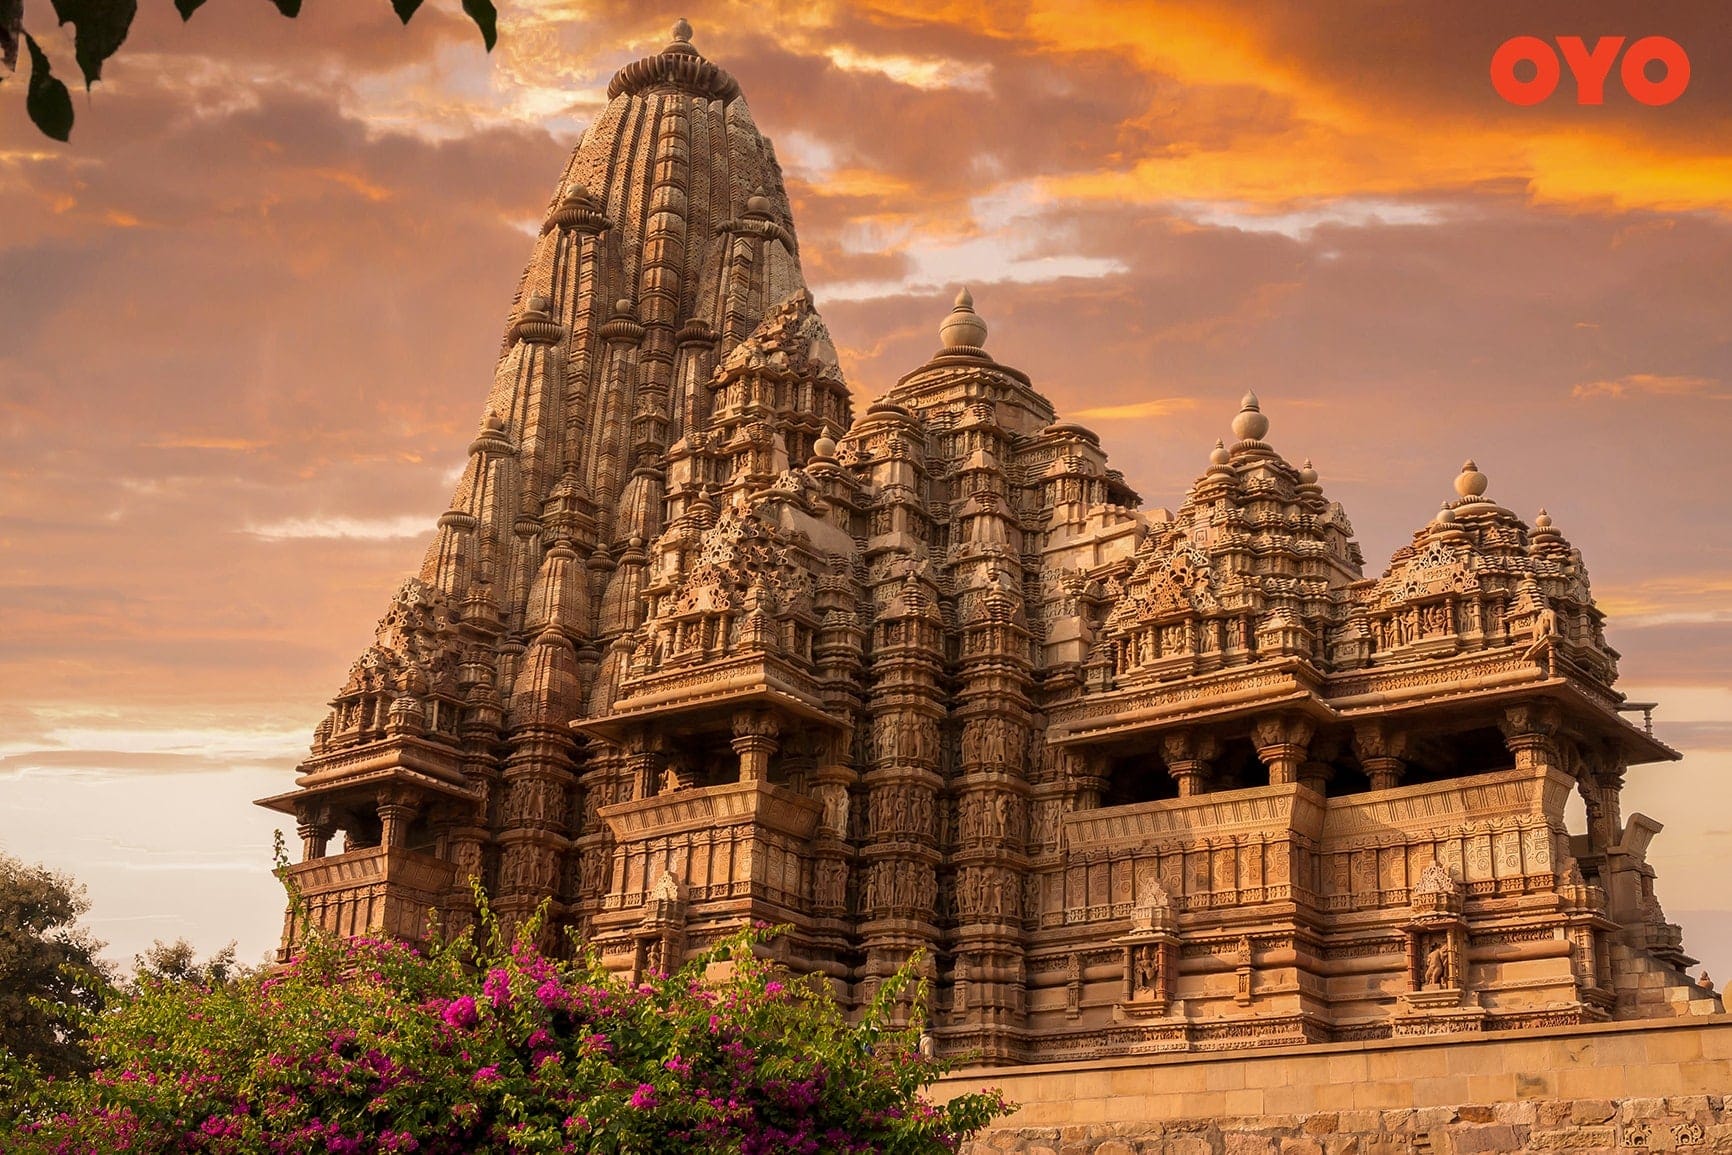 Khajuraho Temples, Madhya Pradesh -one of the most famous historical buildings in India